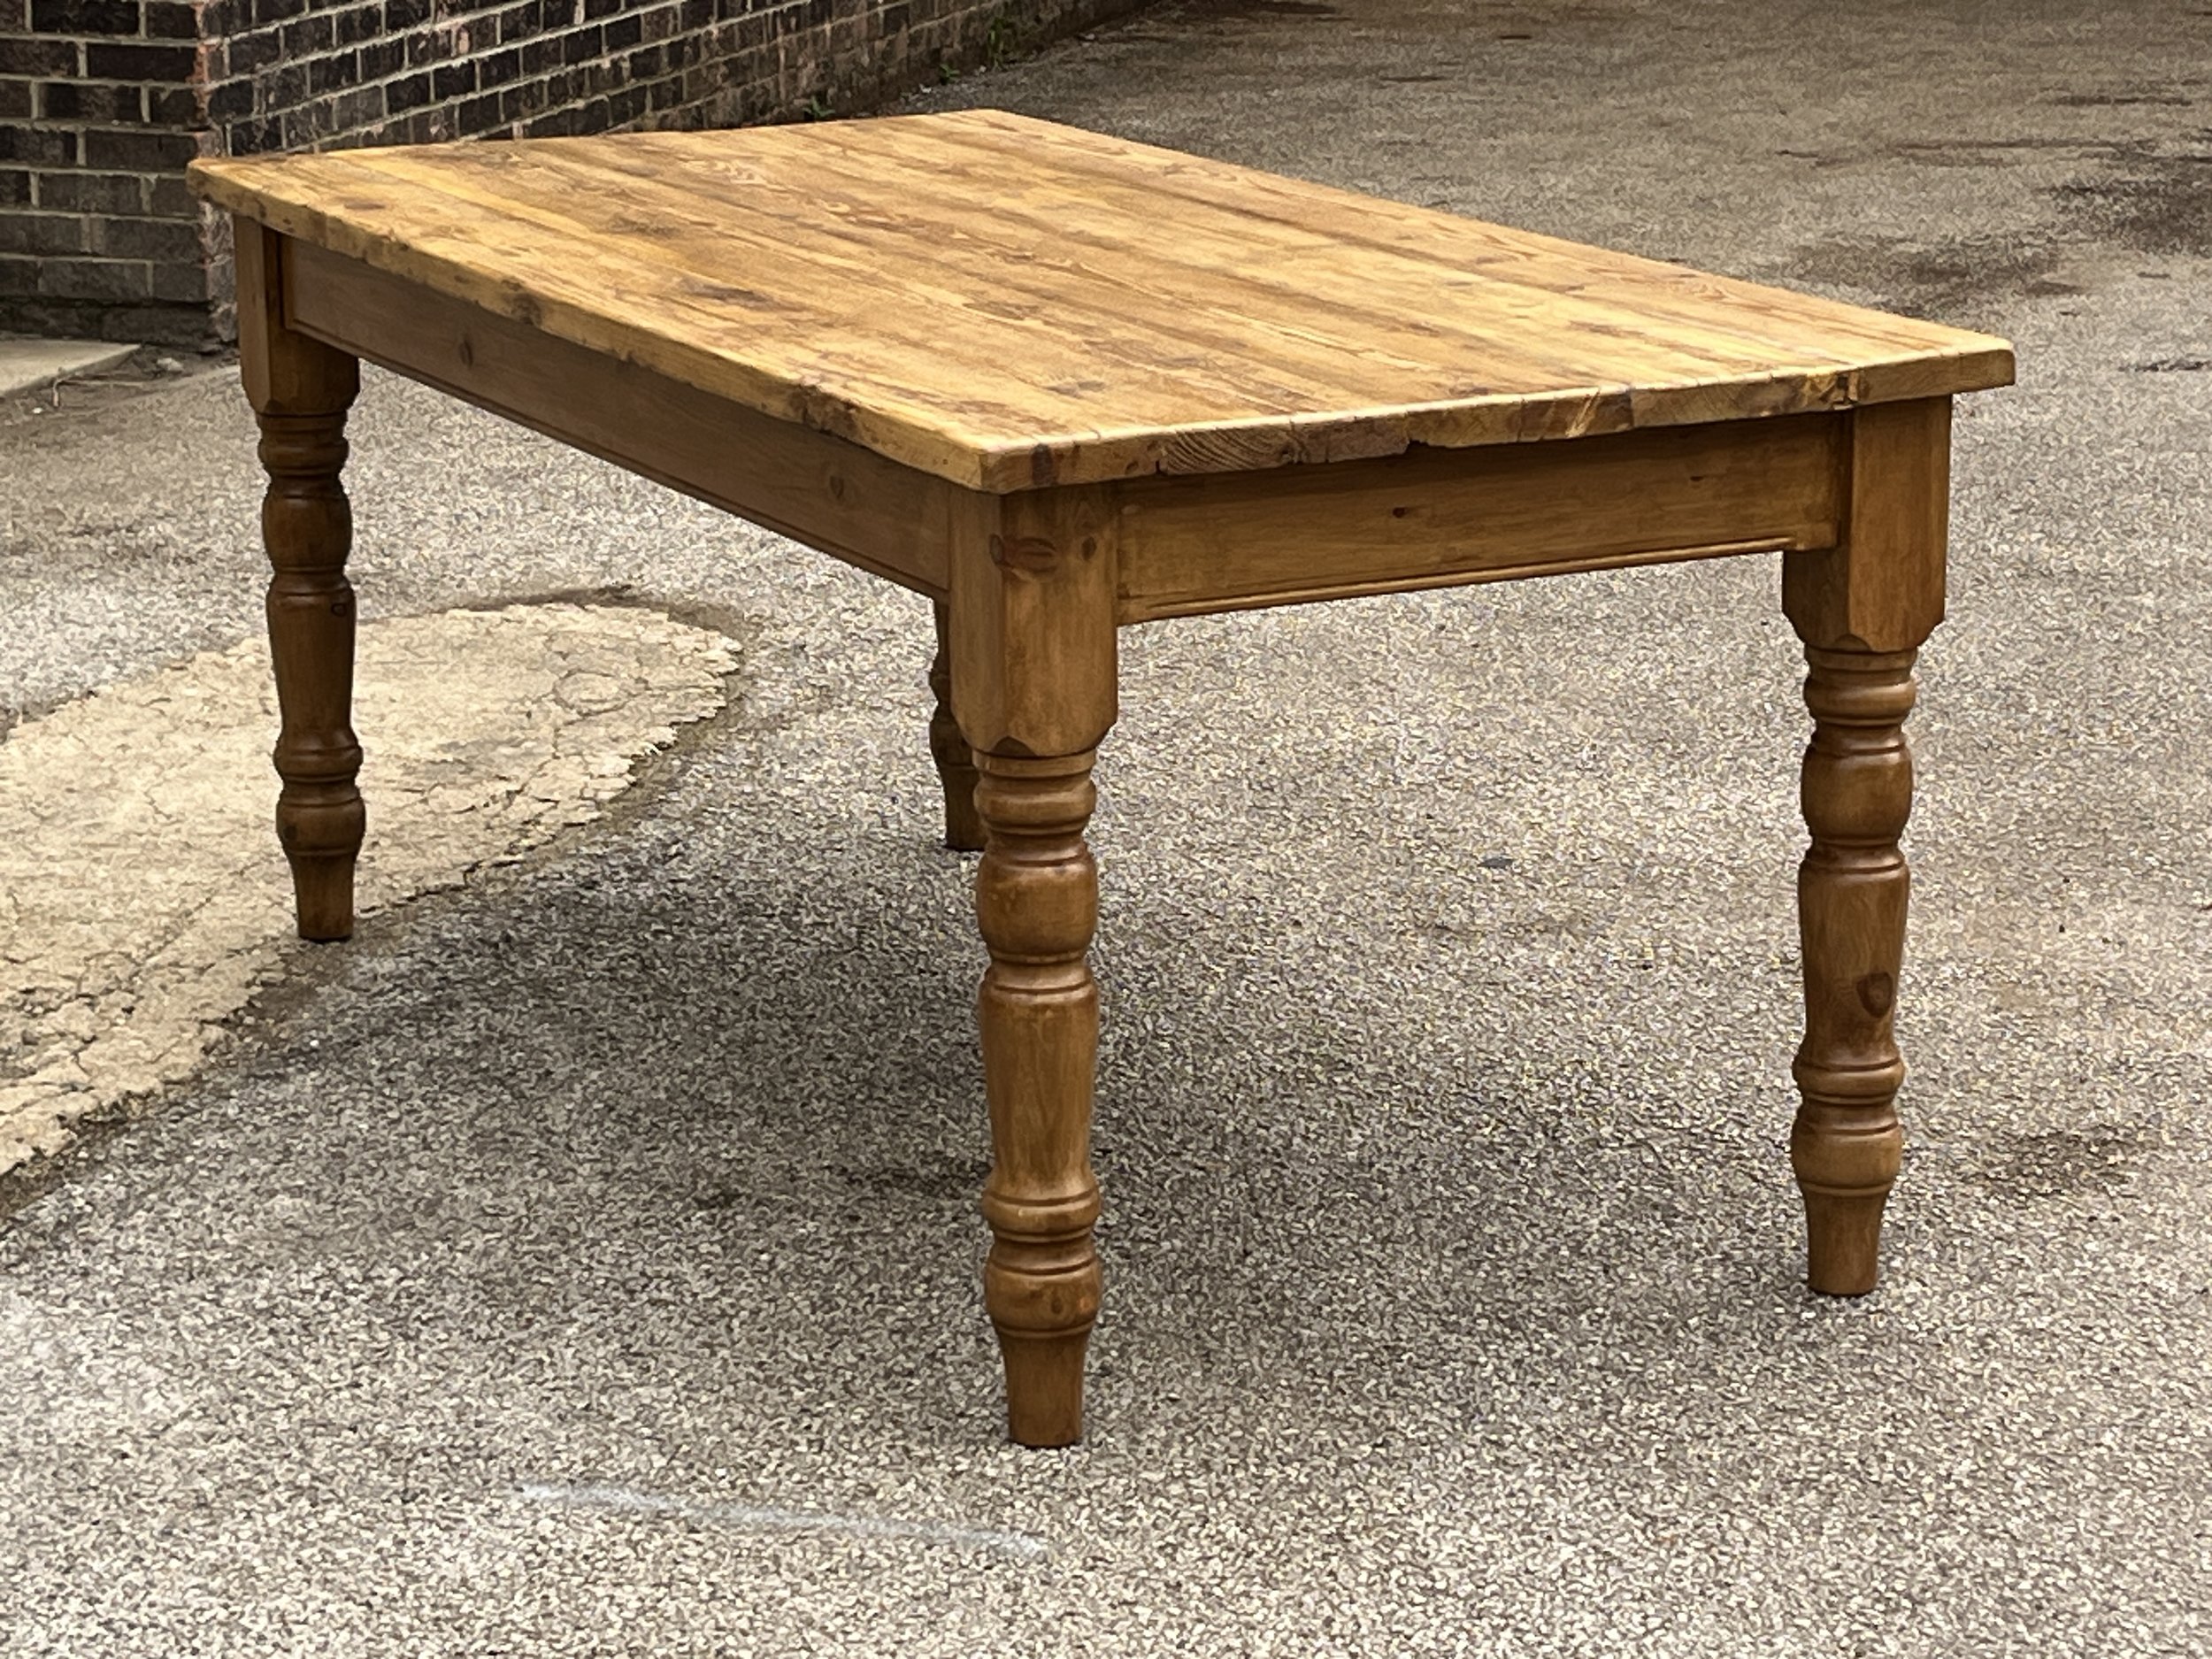 Made to measure pine table